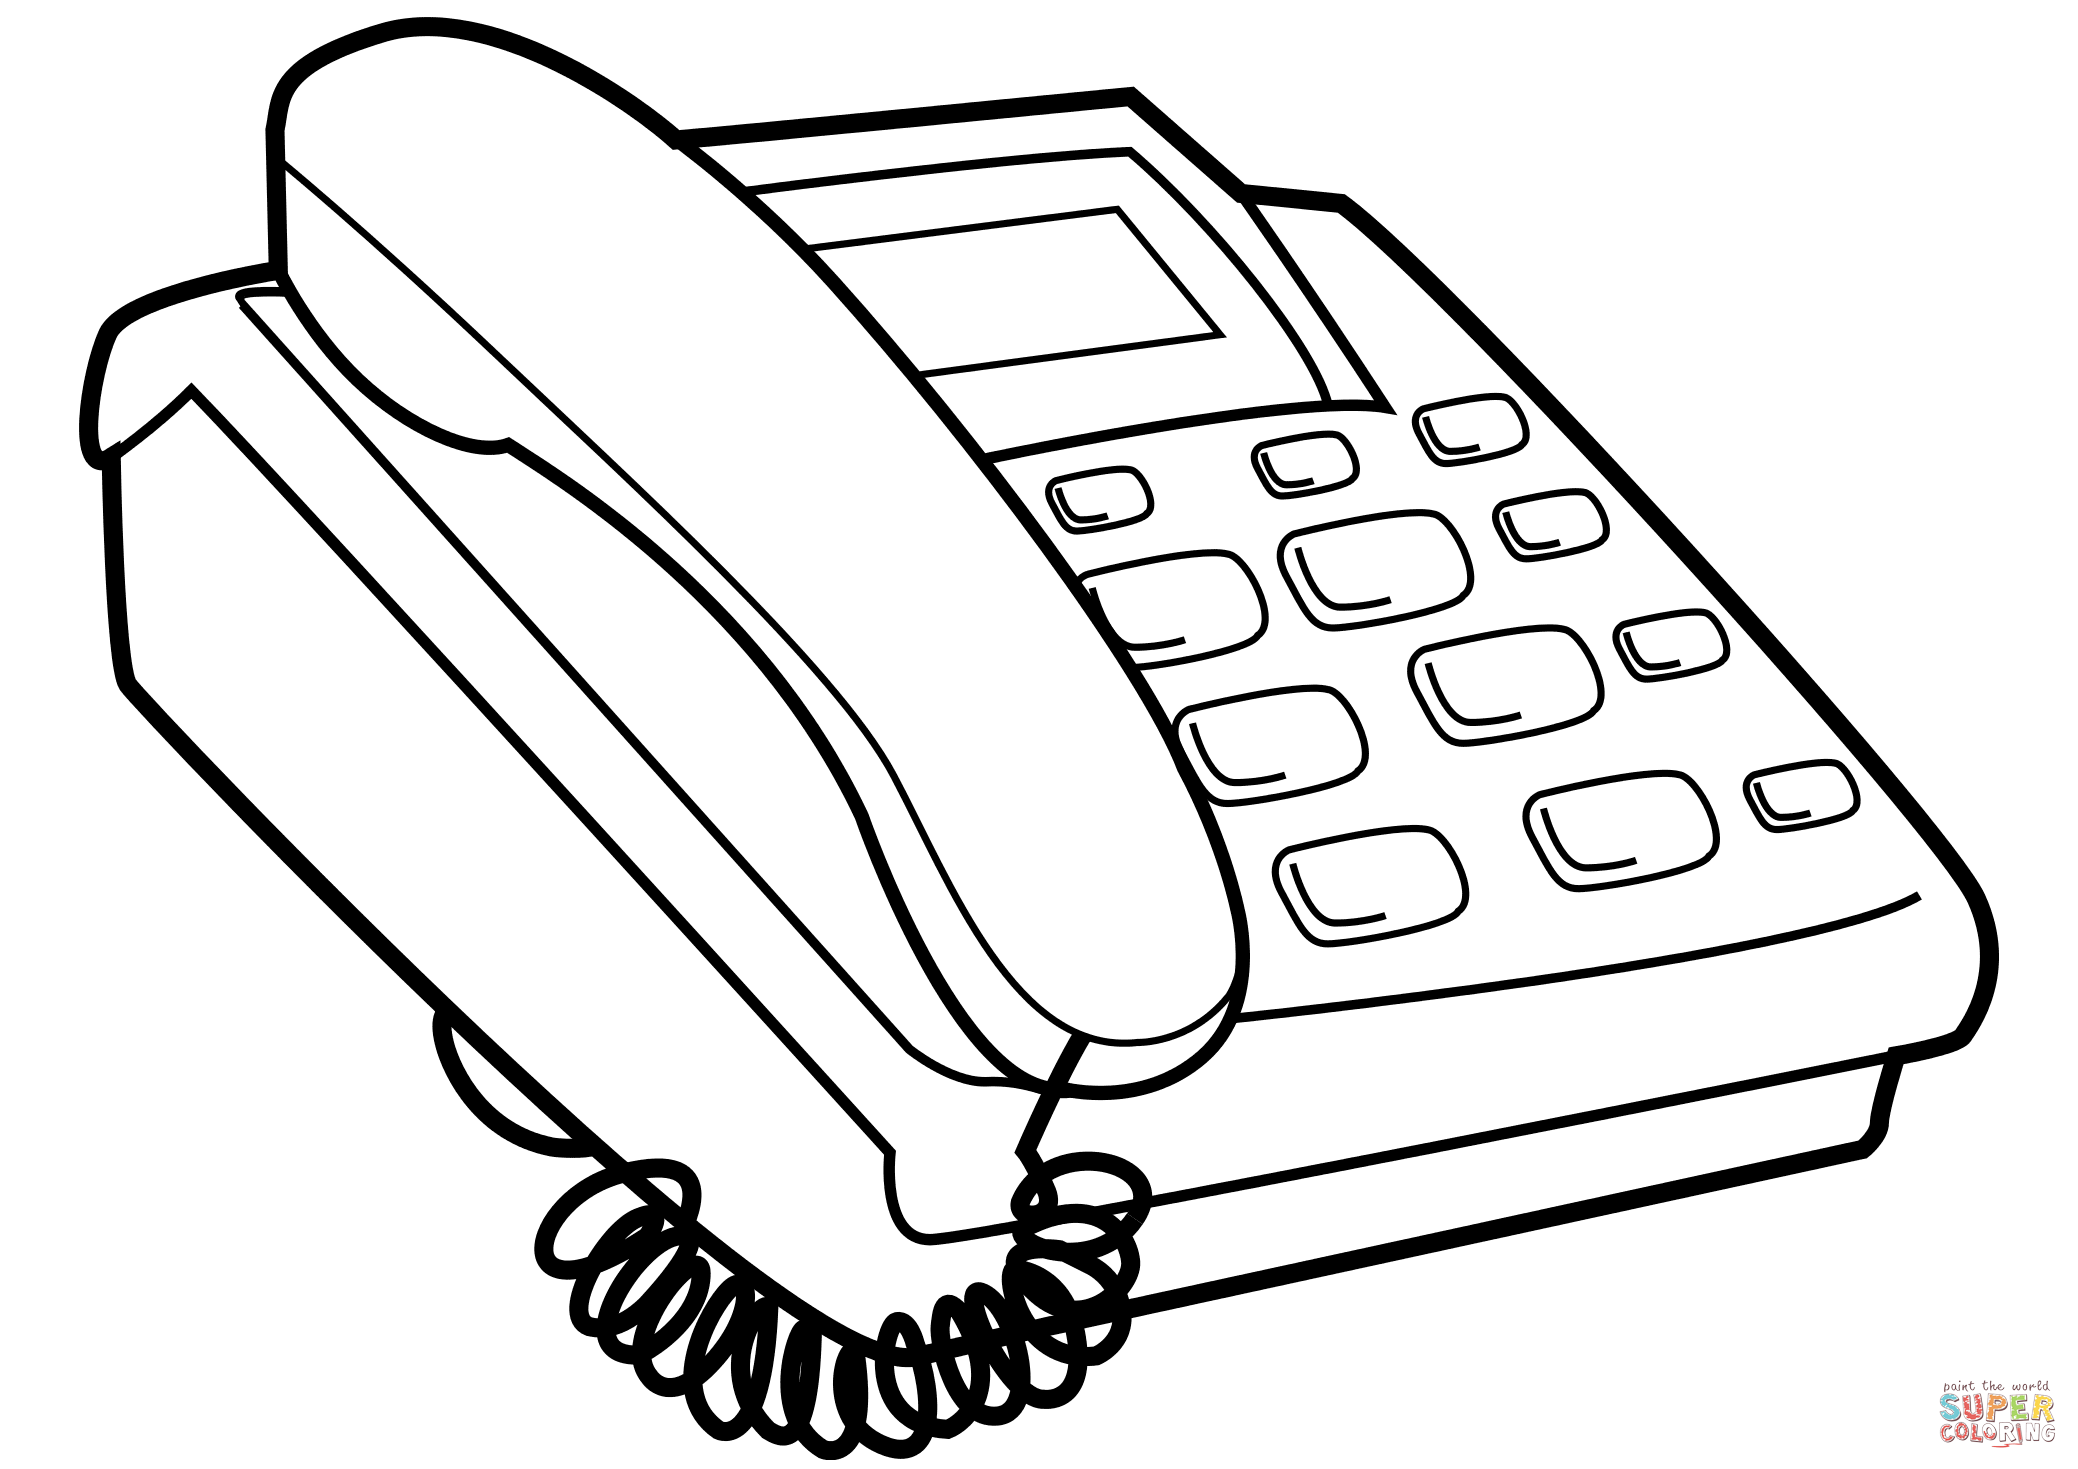 Push button telephone coloring page free printable coloring pages